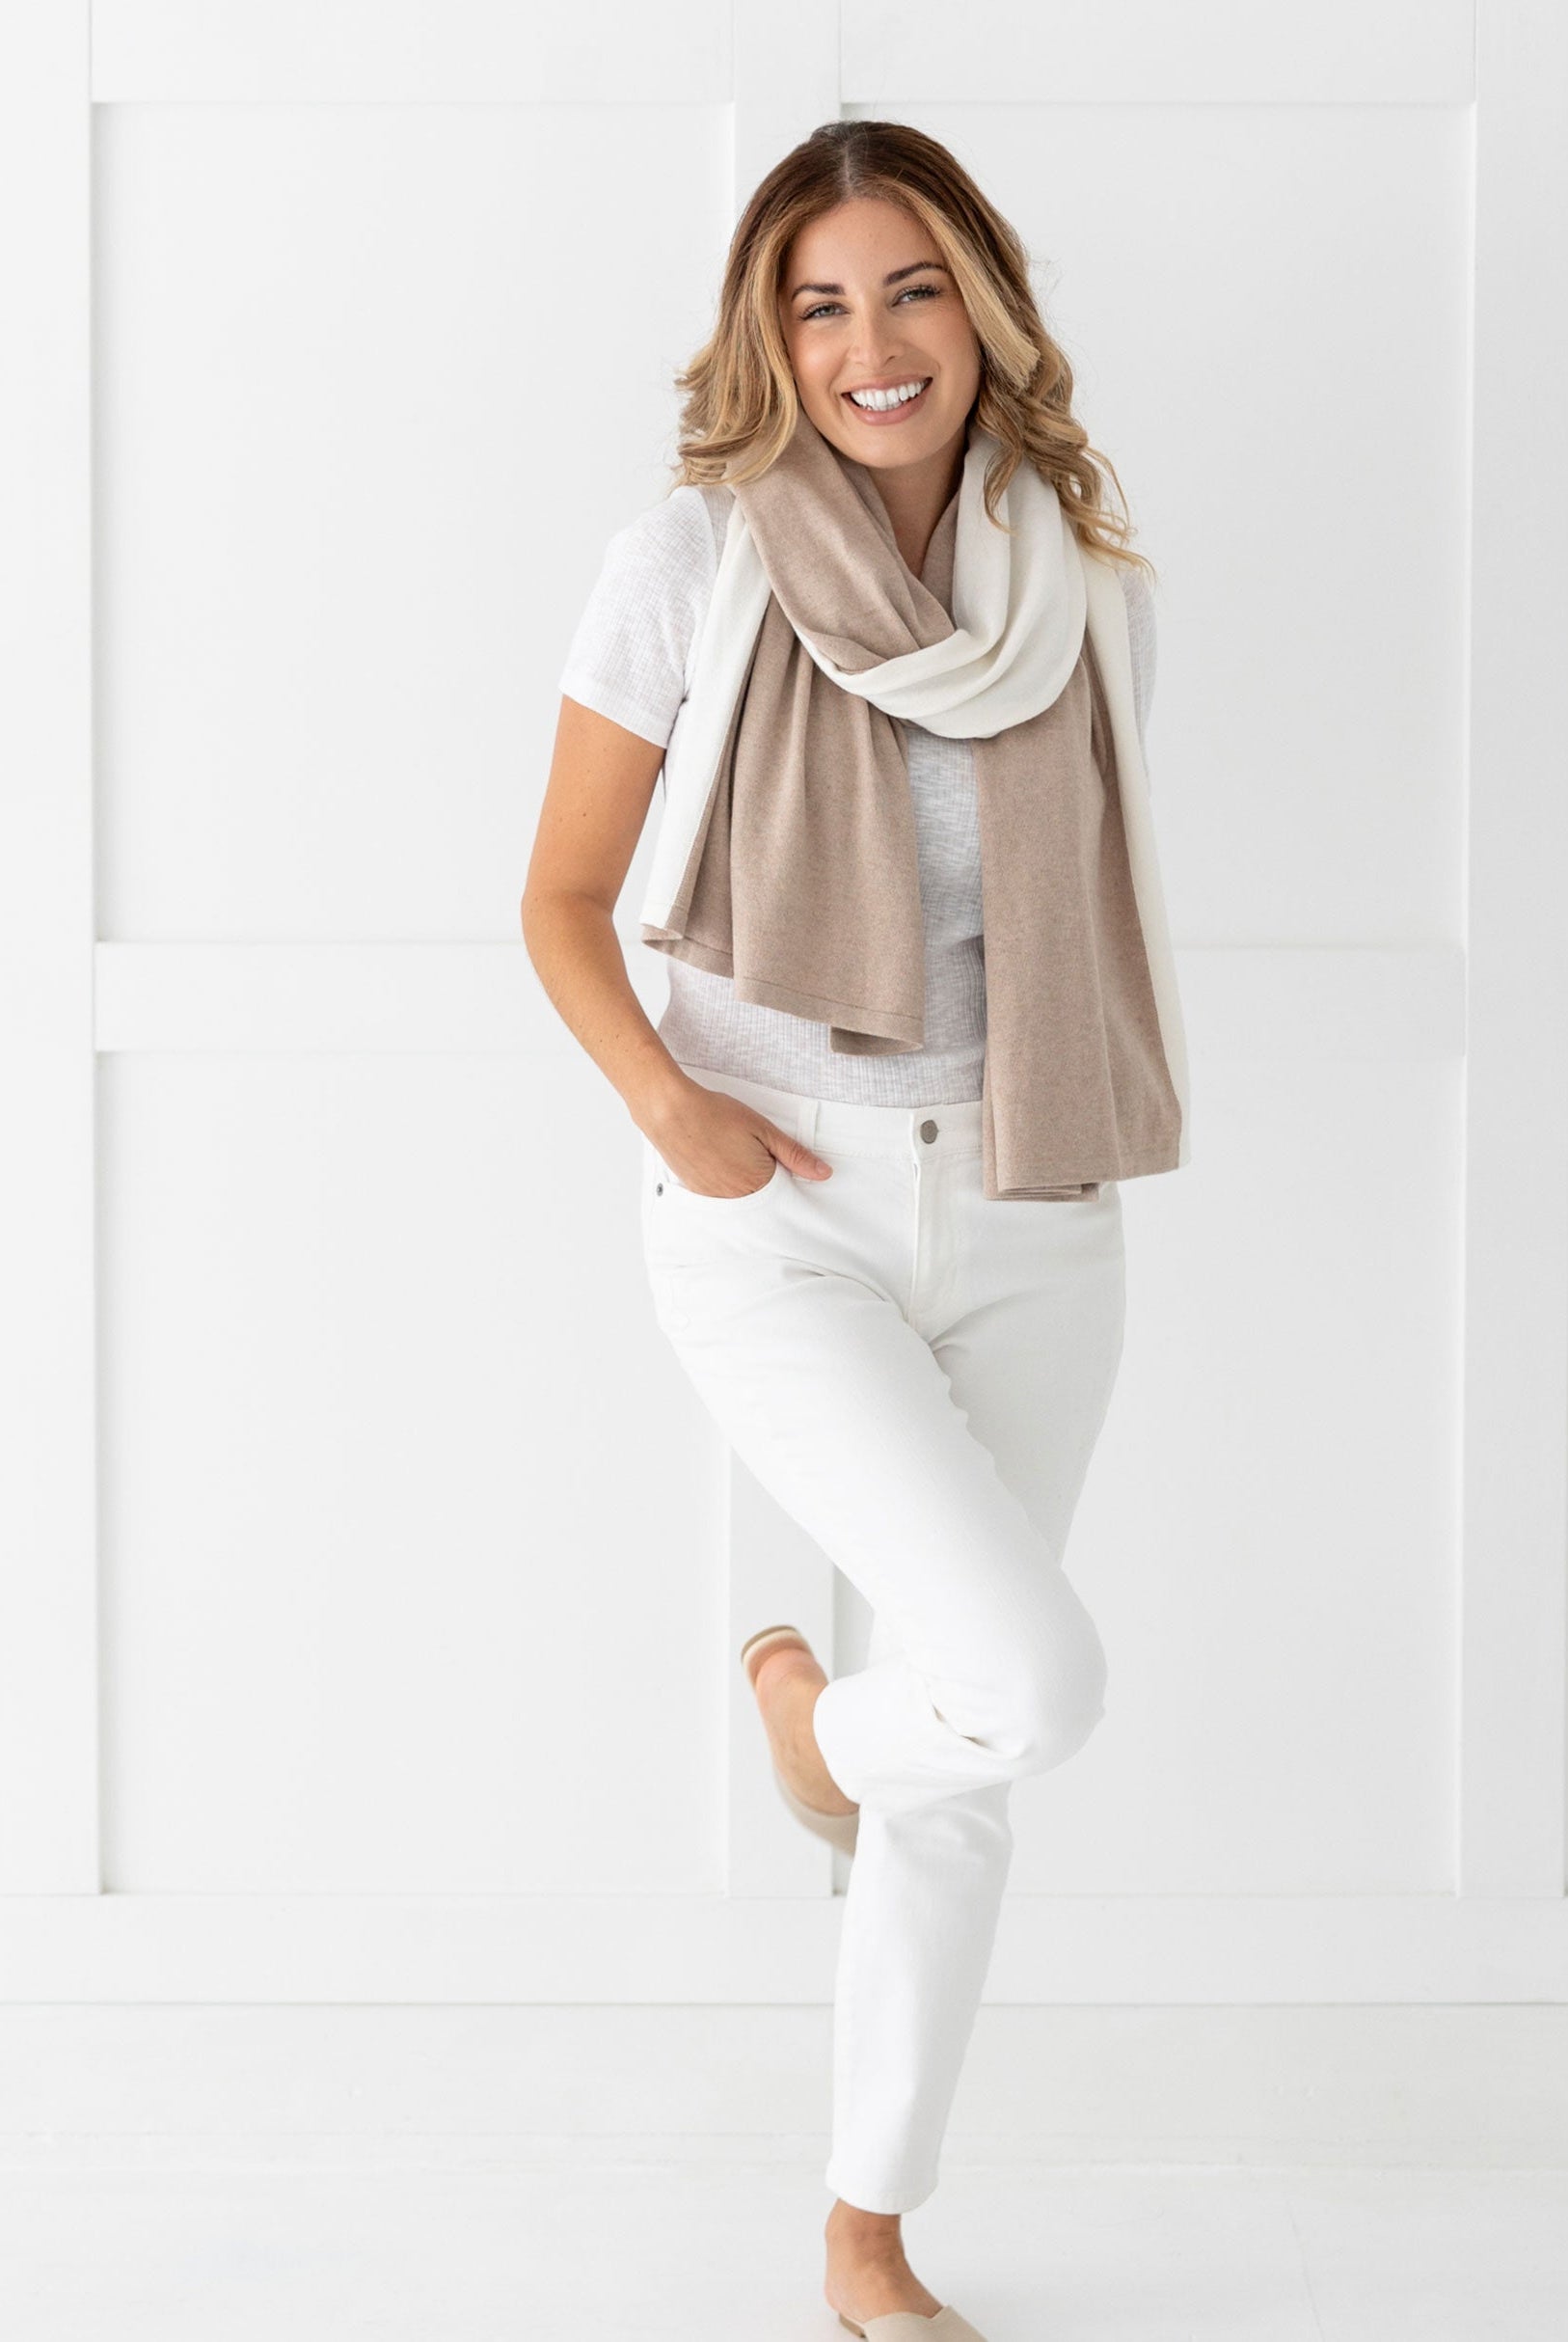 Woman wearing the Cashmere Cotton Luxe Travel Scarf in Sandstone and Ivory Colorblock which is a tan and cream scarf, wearing it as a modern loop